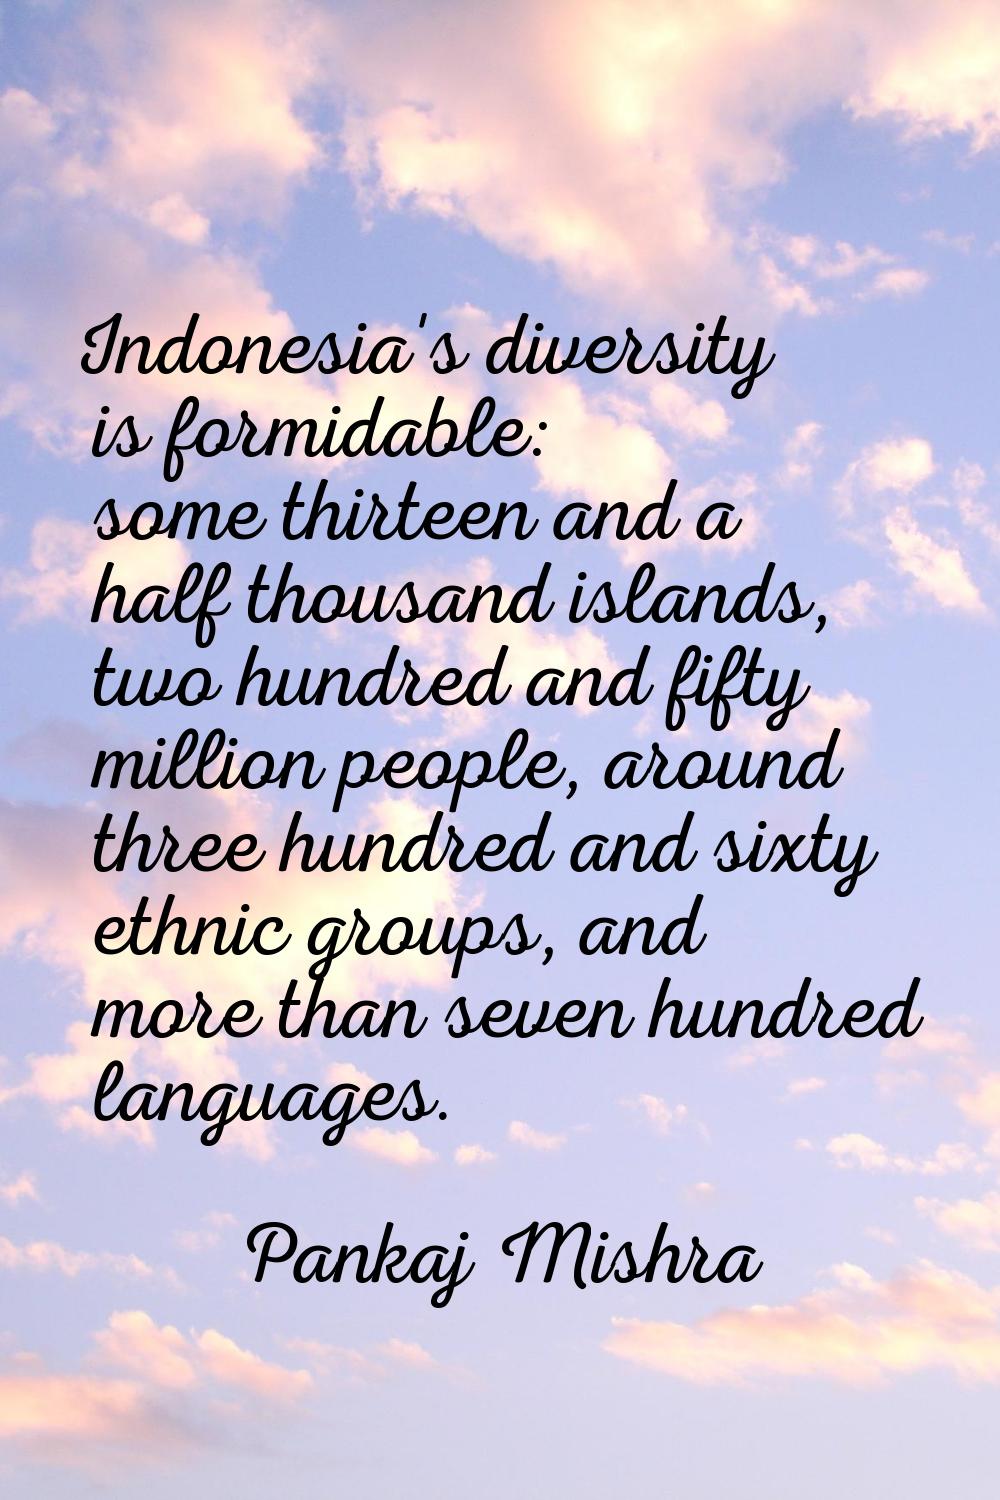 Indonesia's diversity is formidable: some thirteen and a half thousand islands, two hundred and fif